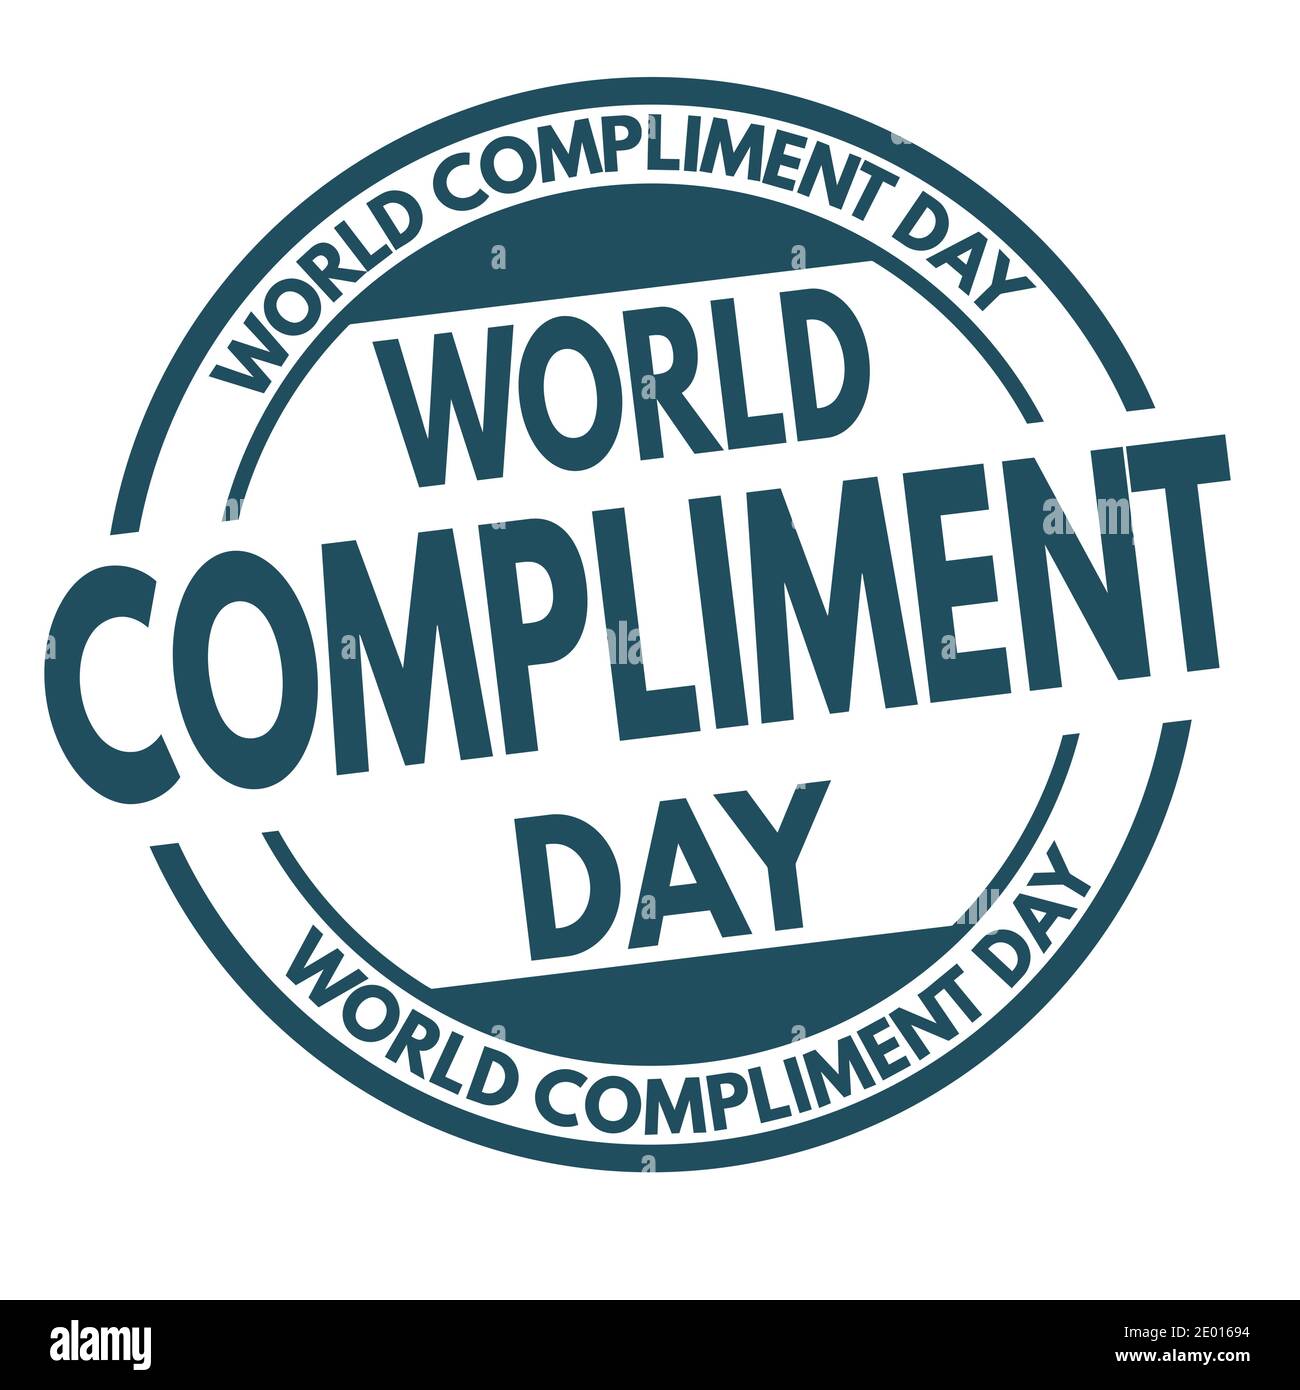 World compliment day sign or stamp on white background, vector illustration Stock Vector